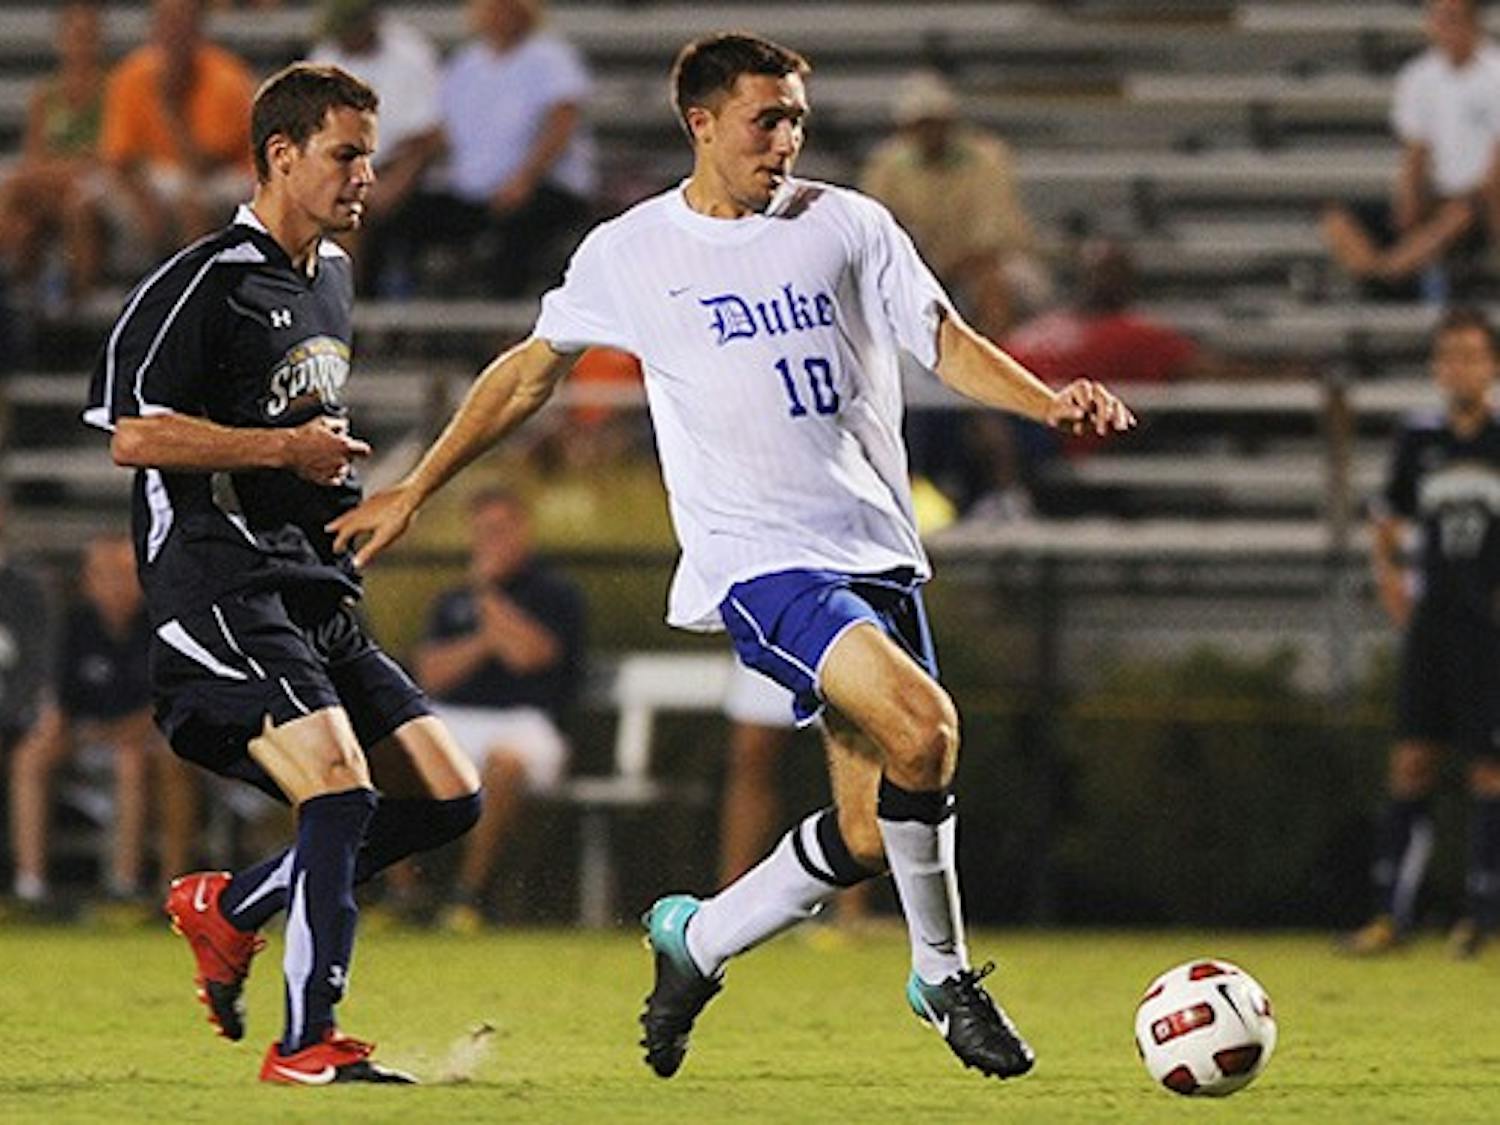 Sophomore Andrew Wenger looks to improve on a ACC Freshman of the Year season, in which he also scored three game-winning goals. and led Duke’s defense.